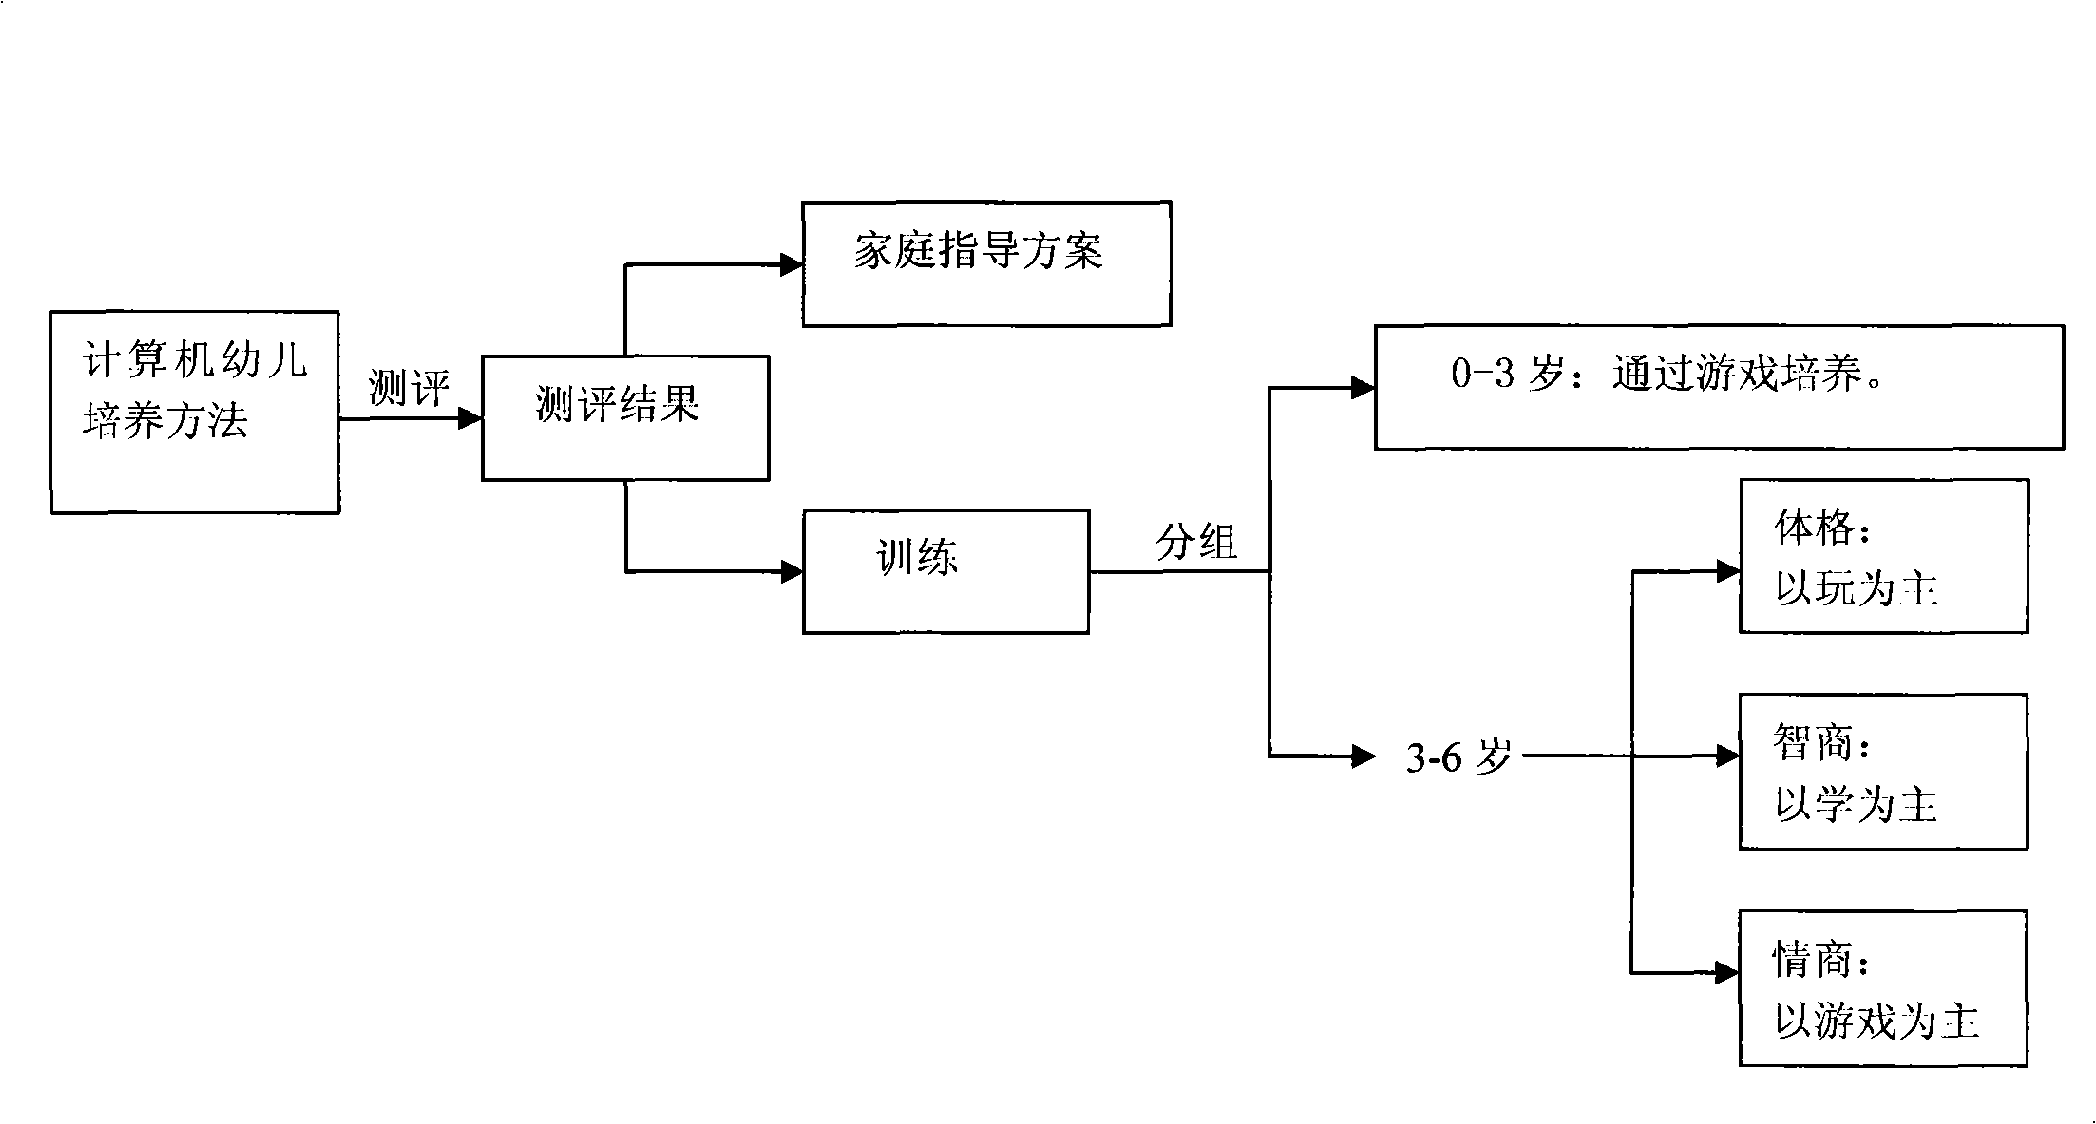 Computer auxiliary child culturing method